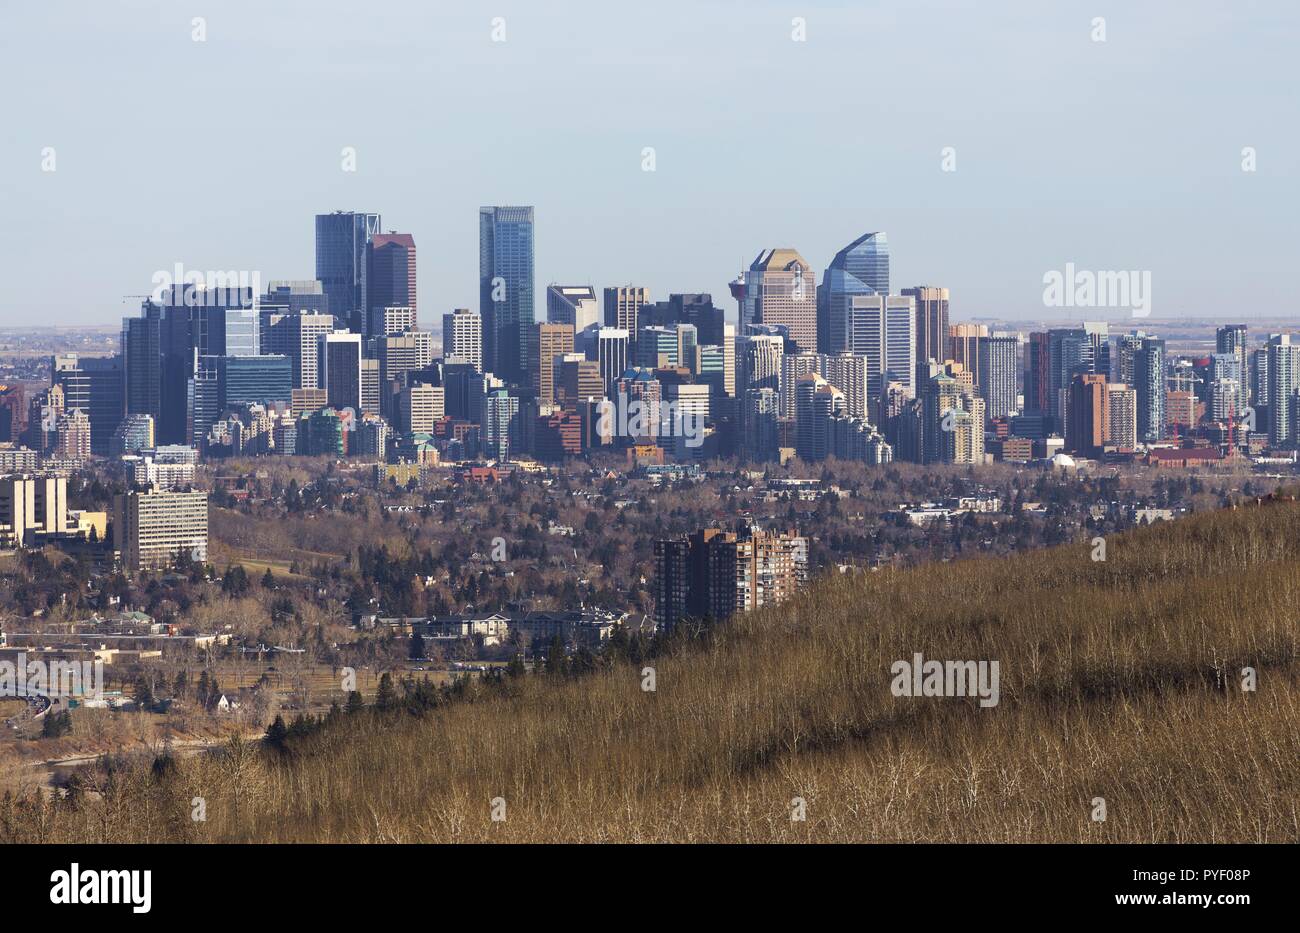 City of Calgary Downtown Skyline with Tall Highrise Buildings on Horizon and Green Prairie Grass Foreground, Southern Alberta Canada Stock Photo